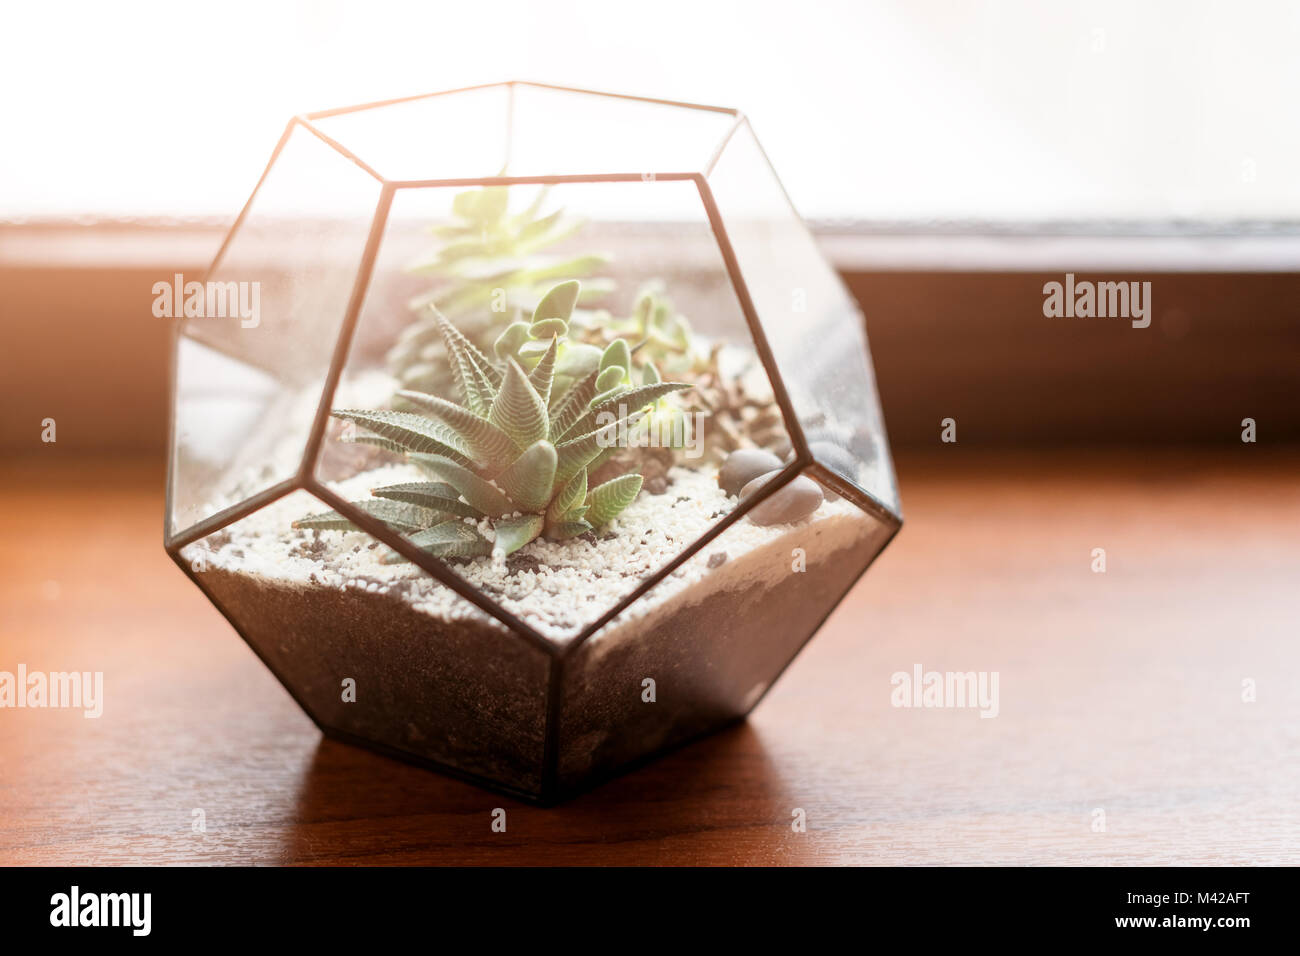 Mini succulent garden in glass terrarium on wooden windowsill. Succulents with sand and rocks in glass box. Home decoration elements. Stock Photo